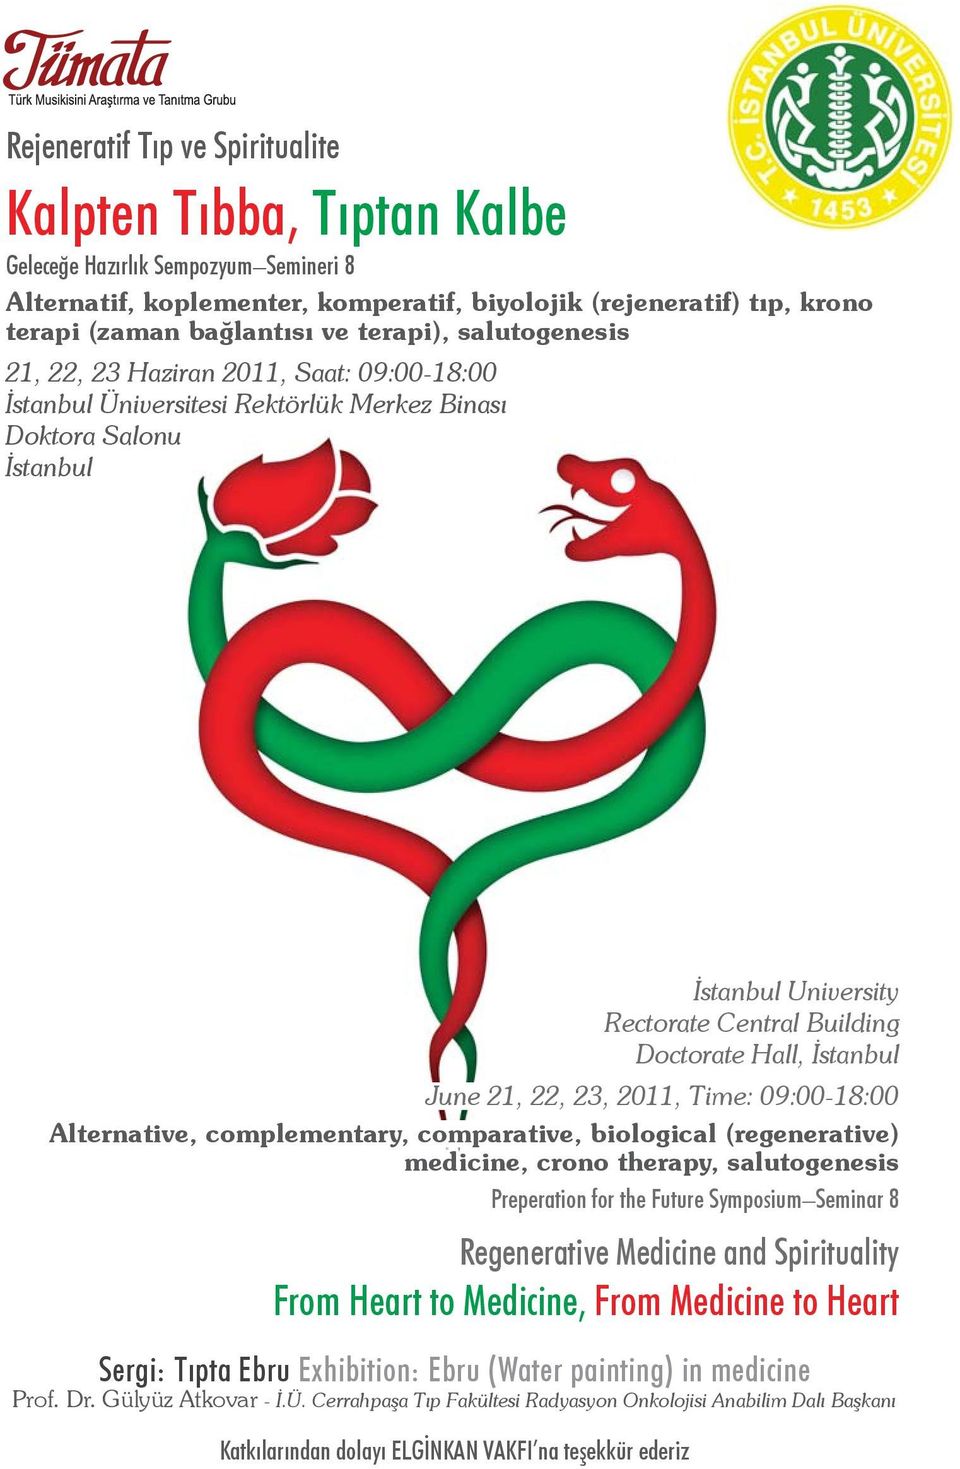 İstanbul June 21, 22, 23, 2011, Time: 09:00-18:00 Alternative, complementary, comparative, biological (regenerative) medicine, crono therapy, salutogenesis Preperation for the Future Symposium